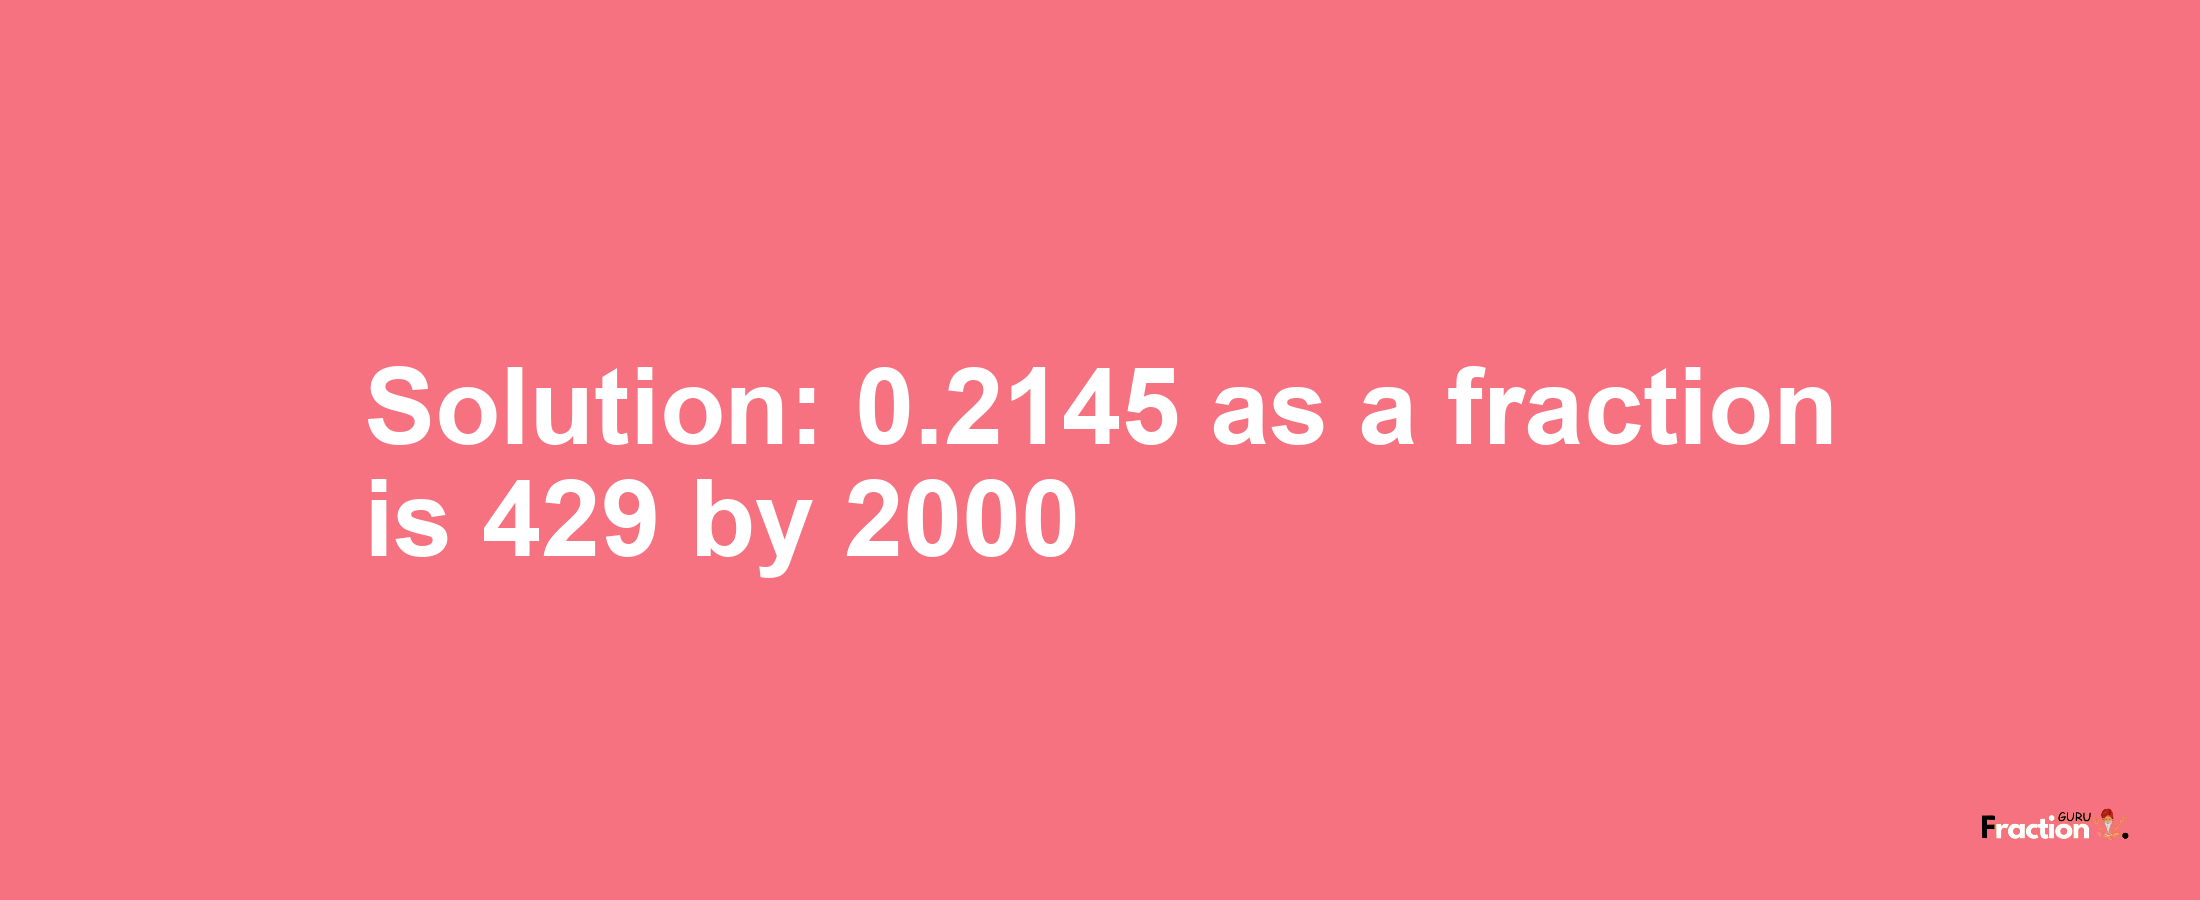 Solution:0.2145 as a fraction is 429/2000